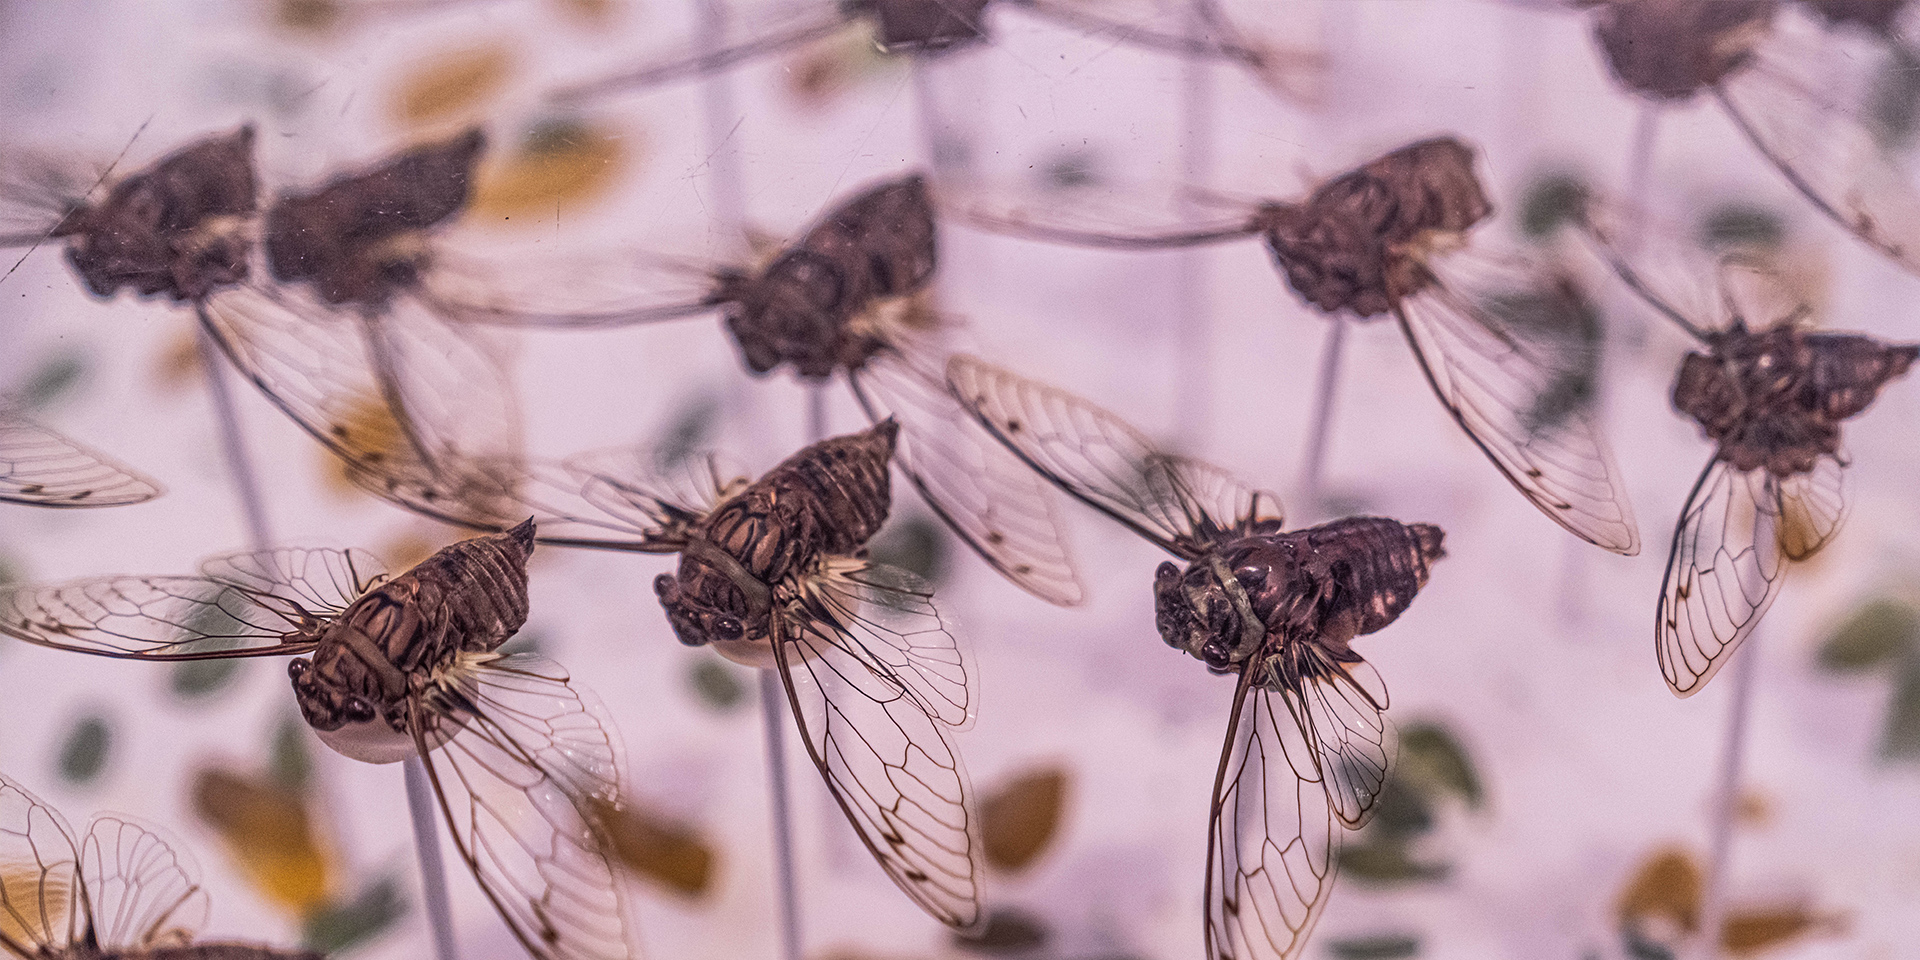 Close up of a swarm of cicadas pinned to a patterned table